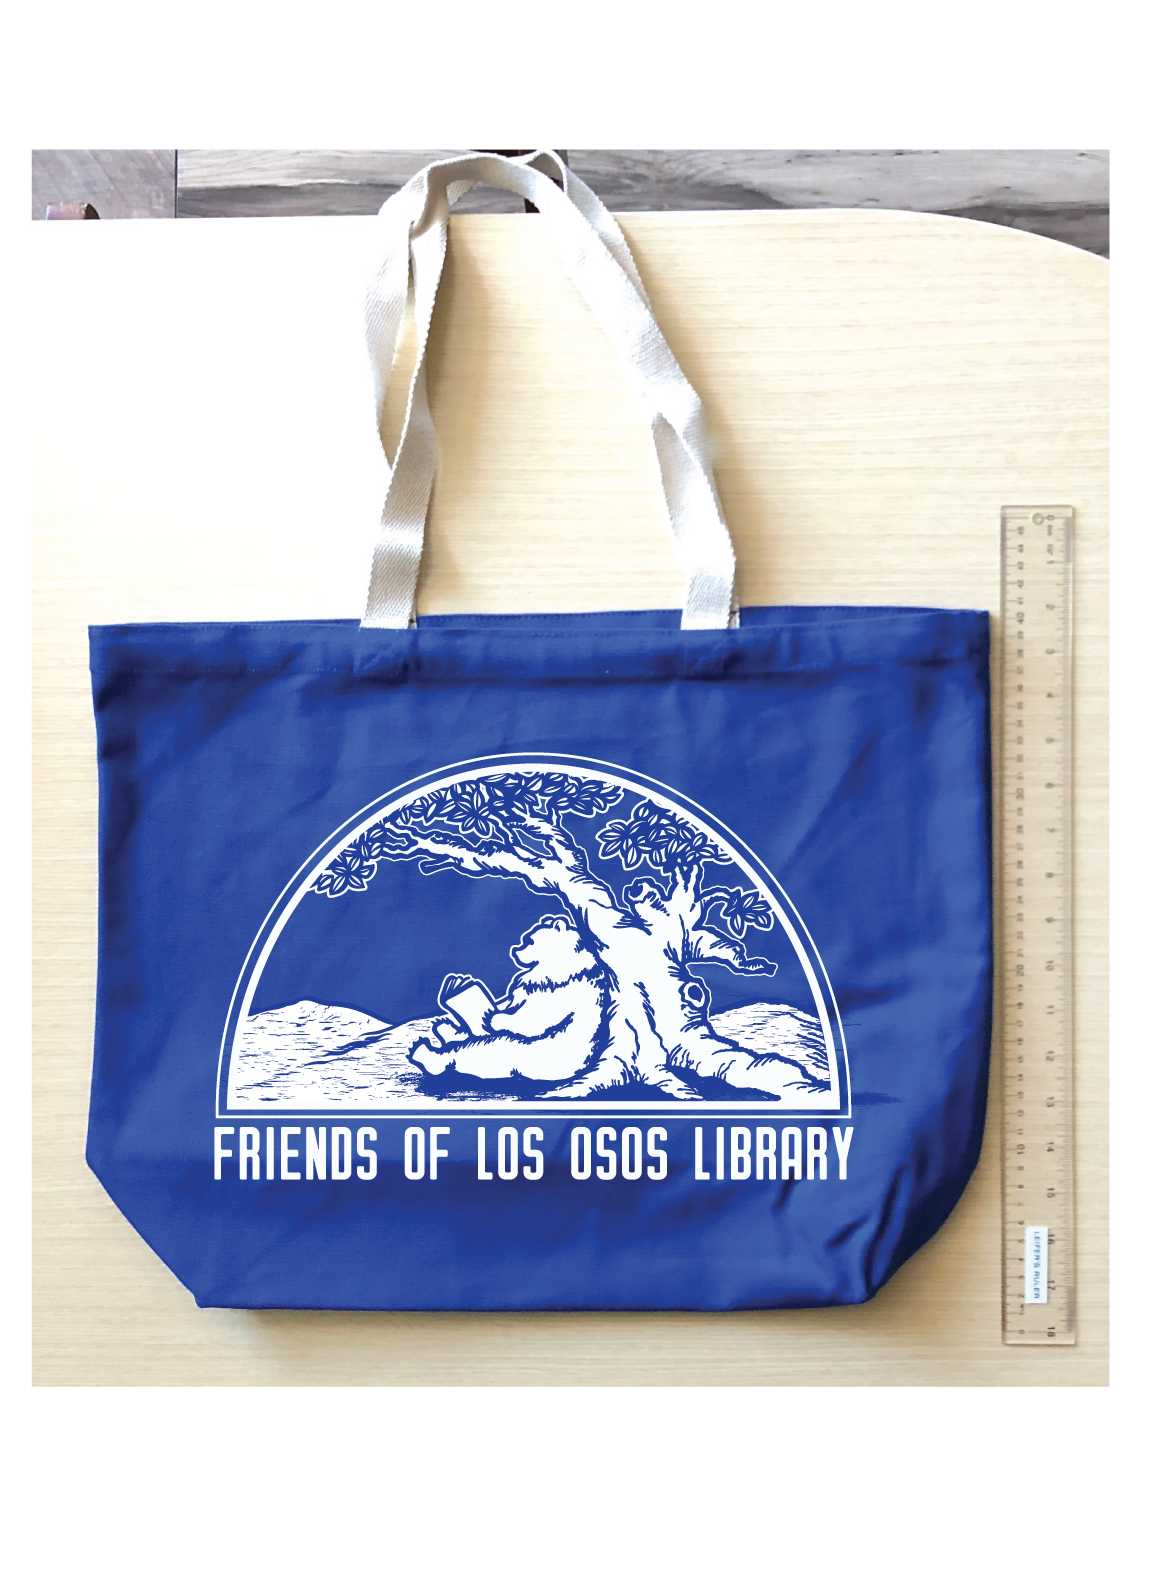 Friends of Los Osos Library book bag